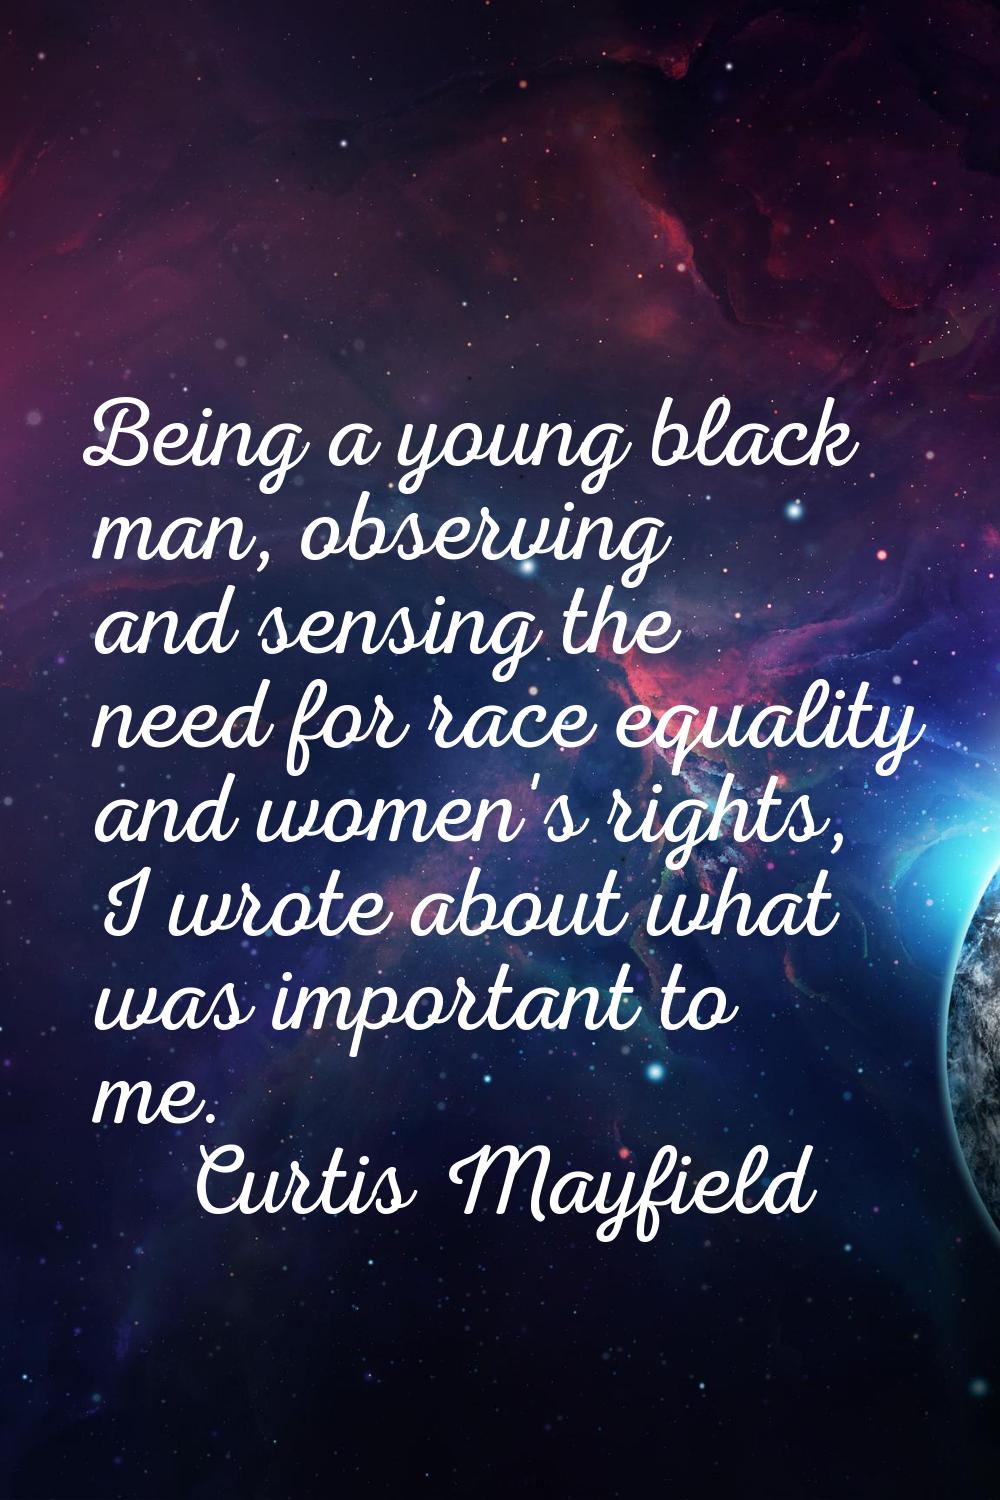 Being a young black man, observing and sensing the need for race equality and women's rights, I wro